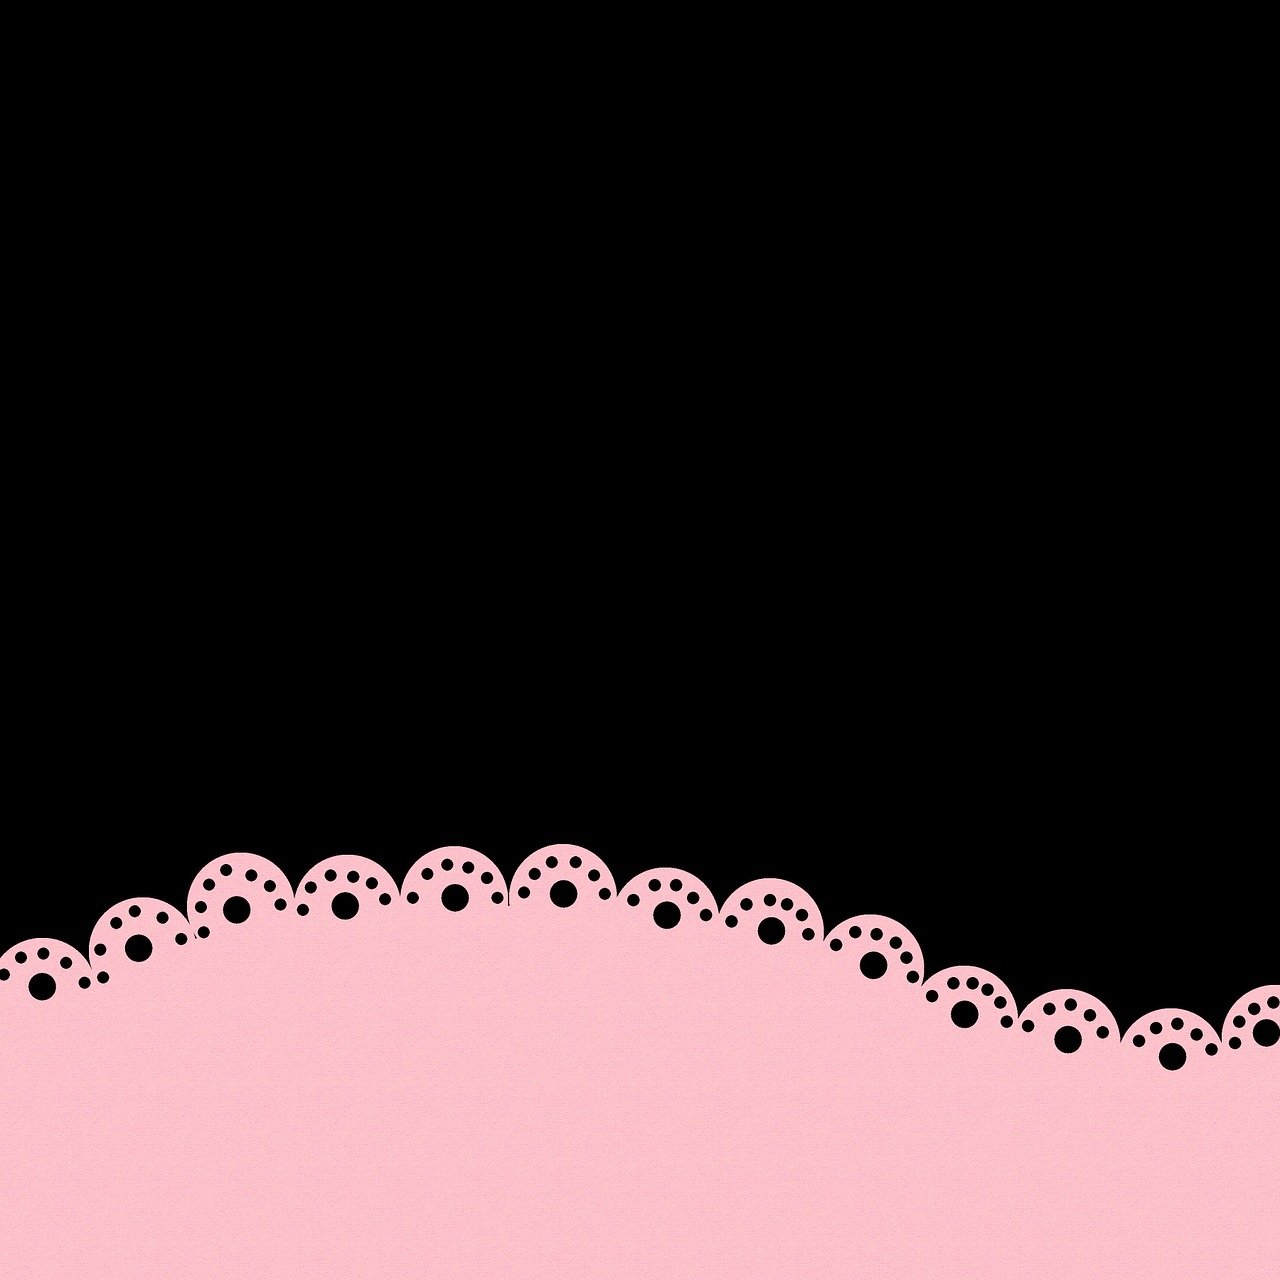 a pink doily border on a black background, a digital rendering, inspired by Kanō Takanobu, deviantart, mount fuji background, bumps, romantic simple path traced, background is space